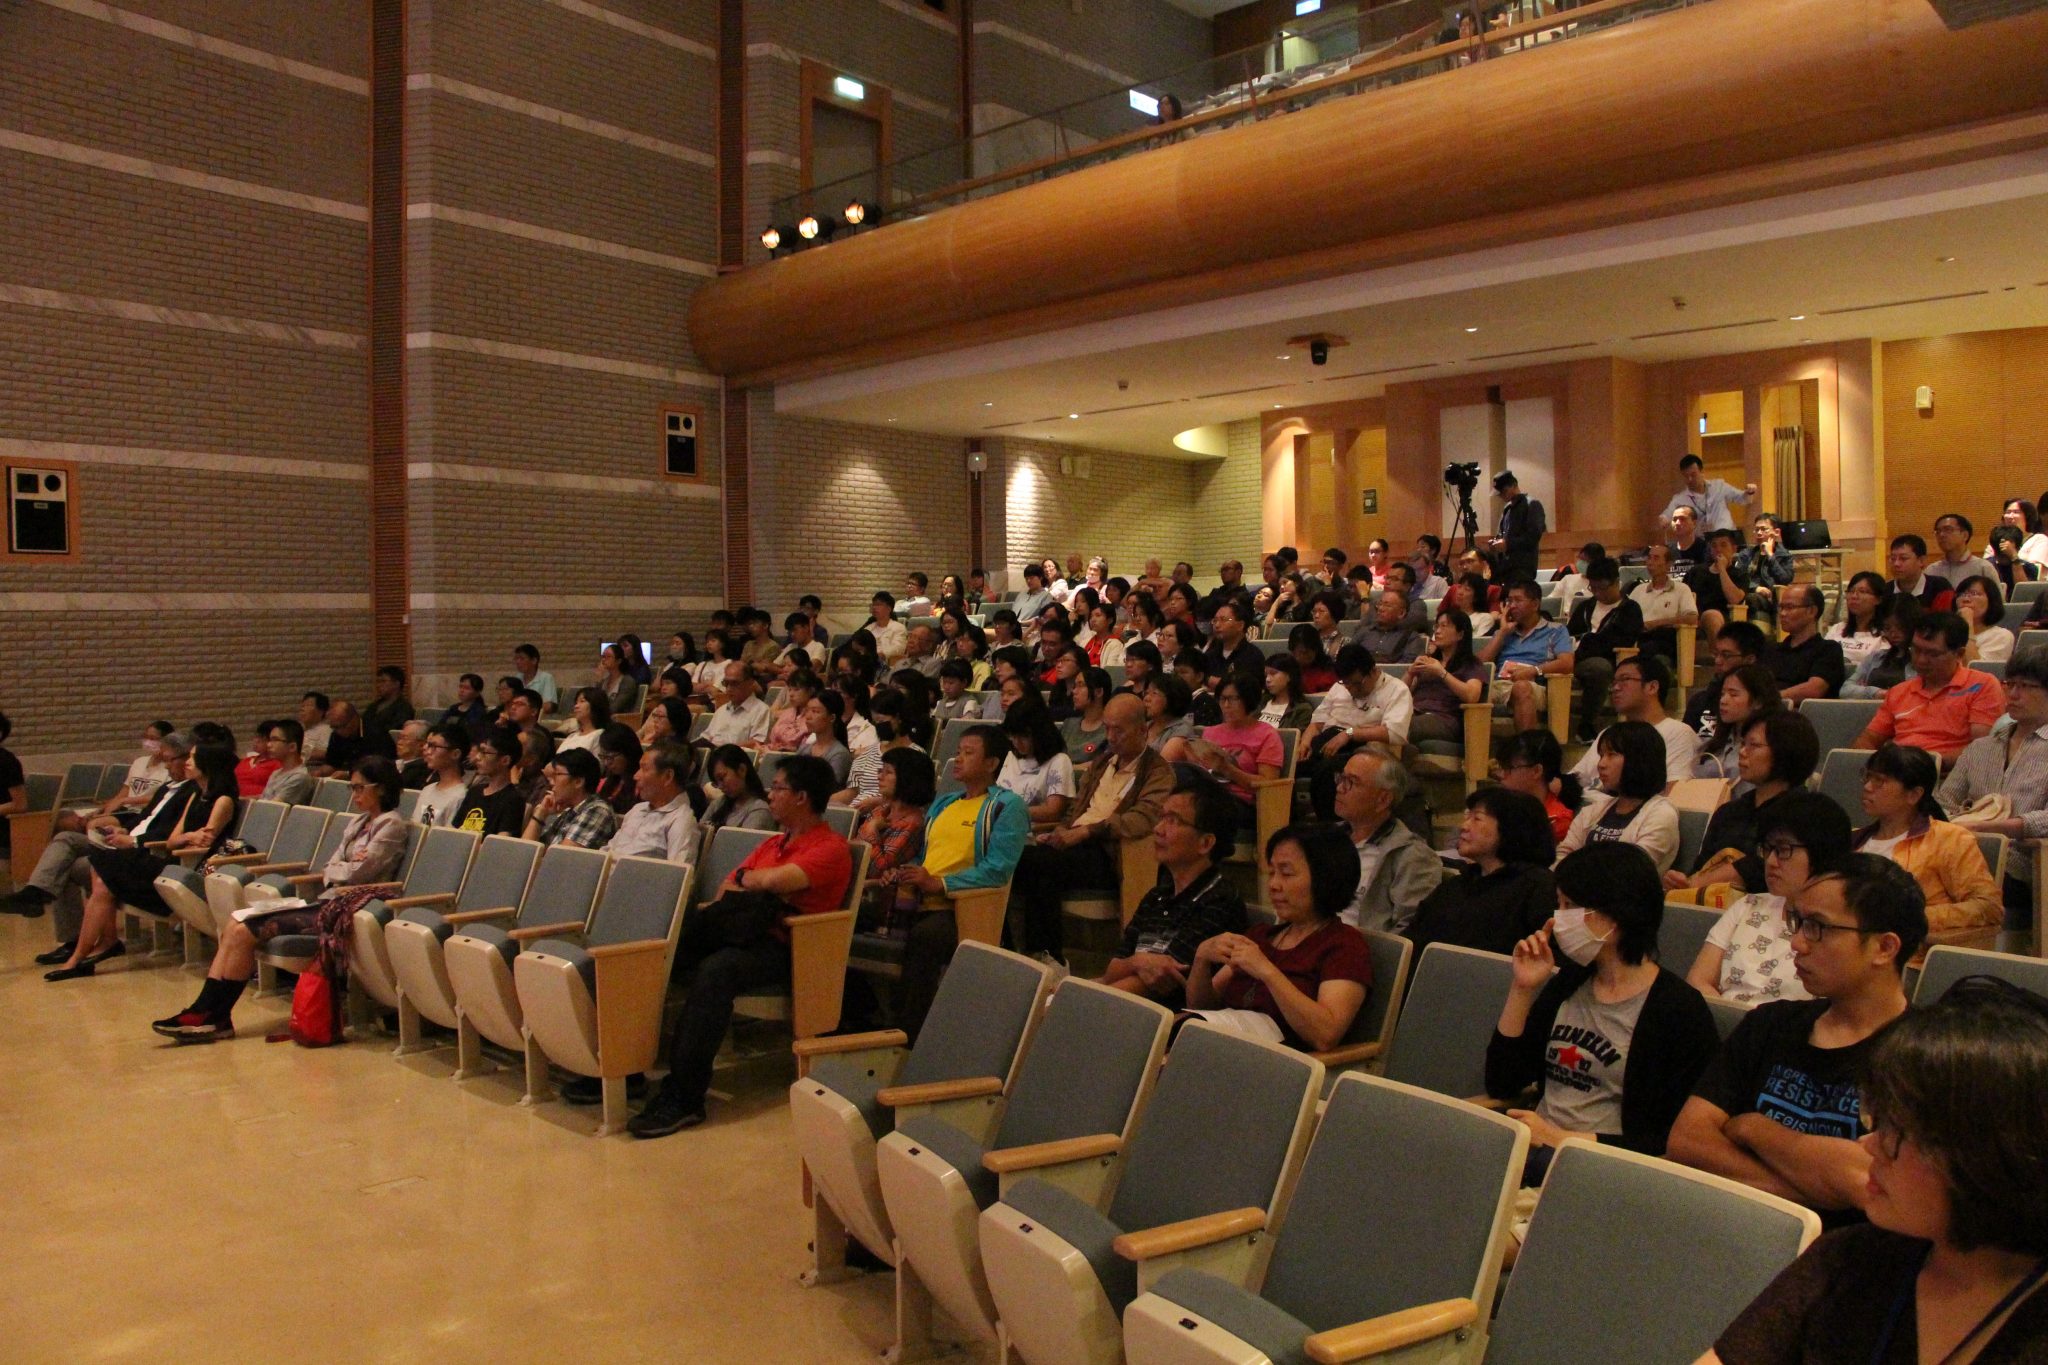 Island-wide Popular Science Lecture Series in Tainan (Aug. 25)